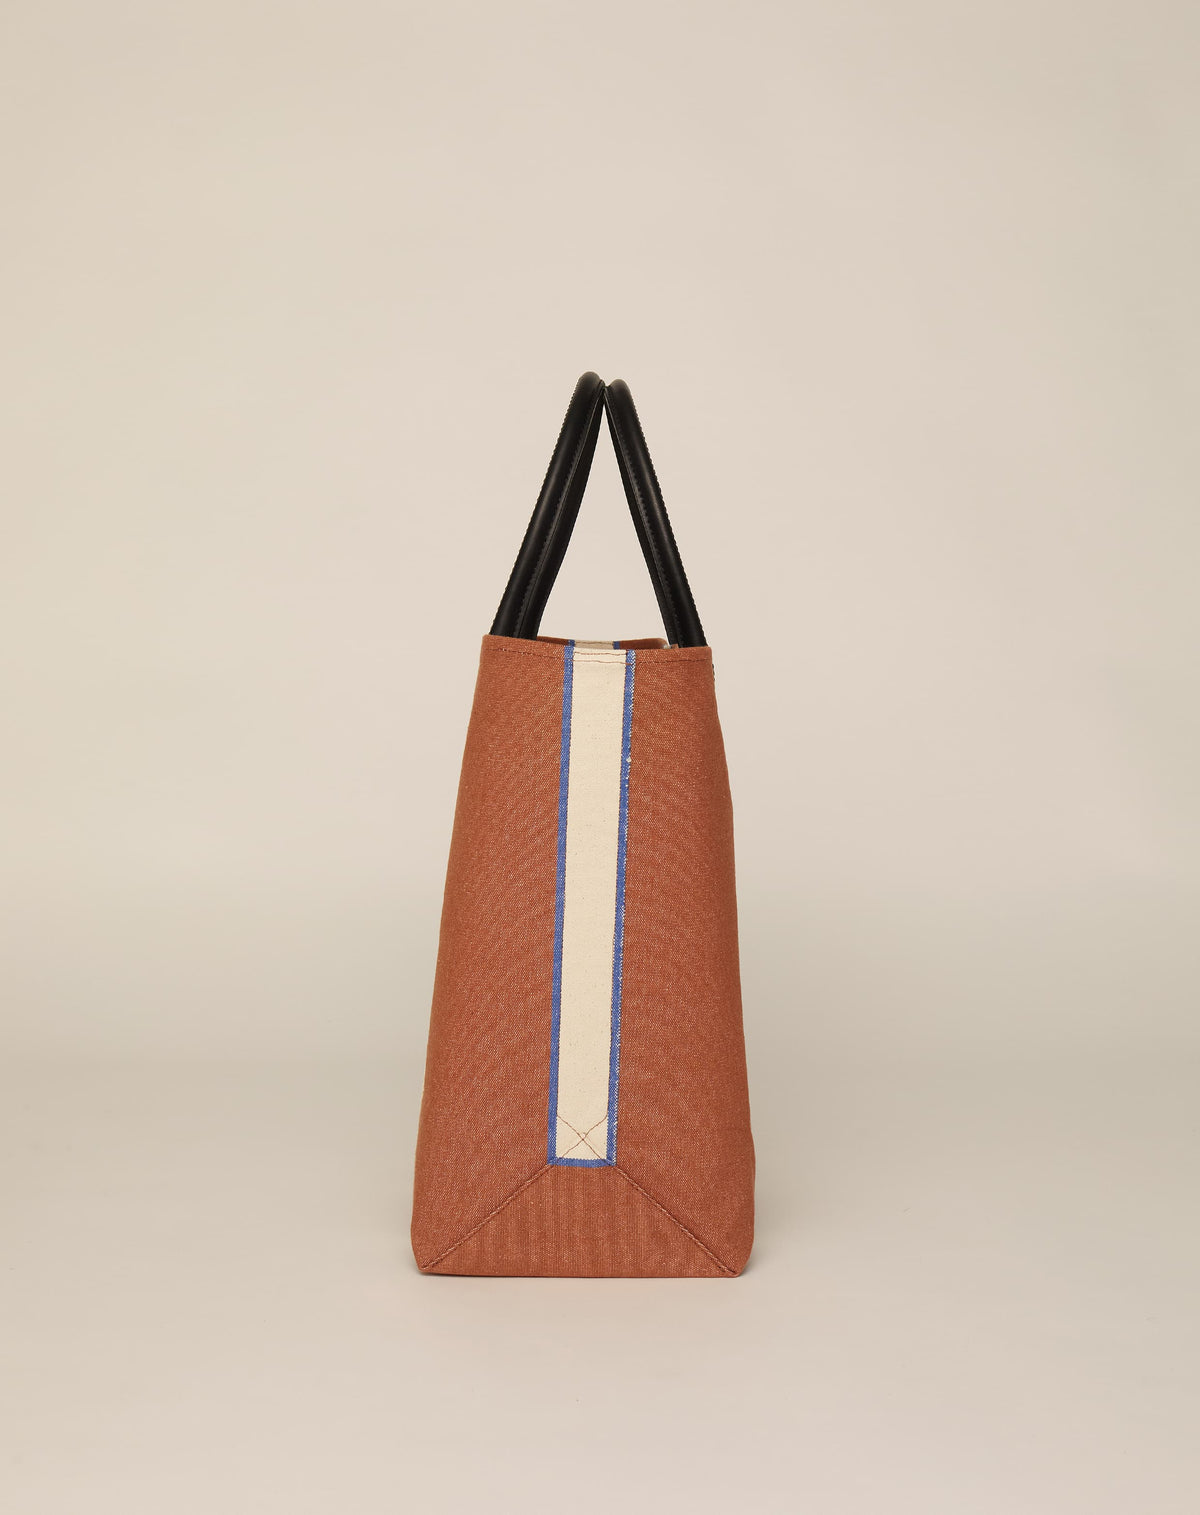 Original MK sling bag with tanned colour